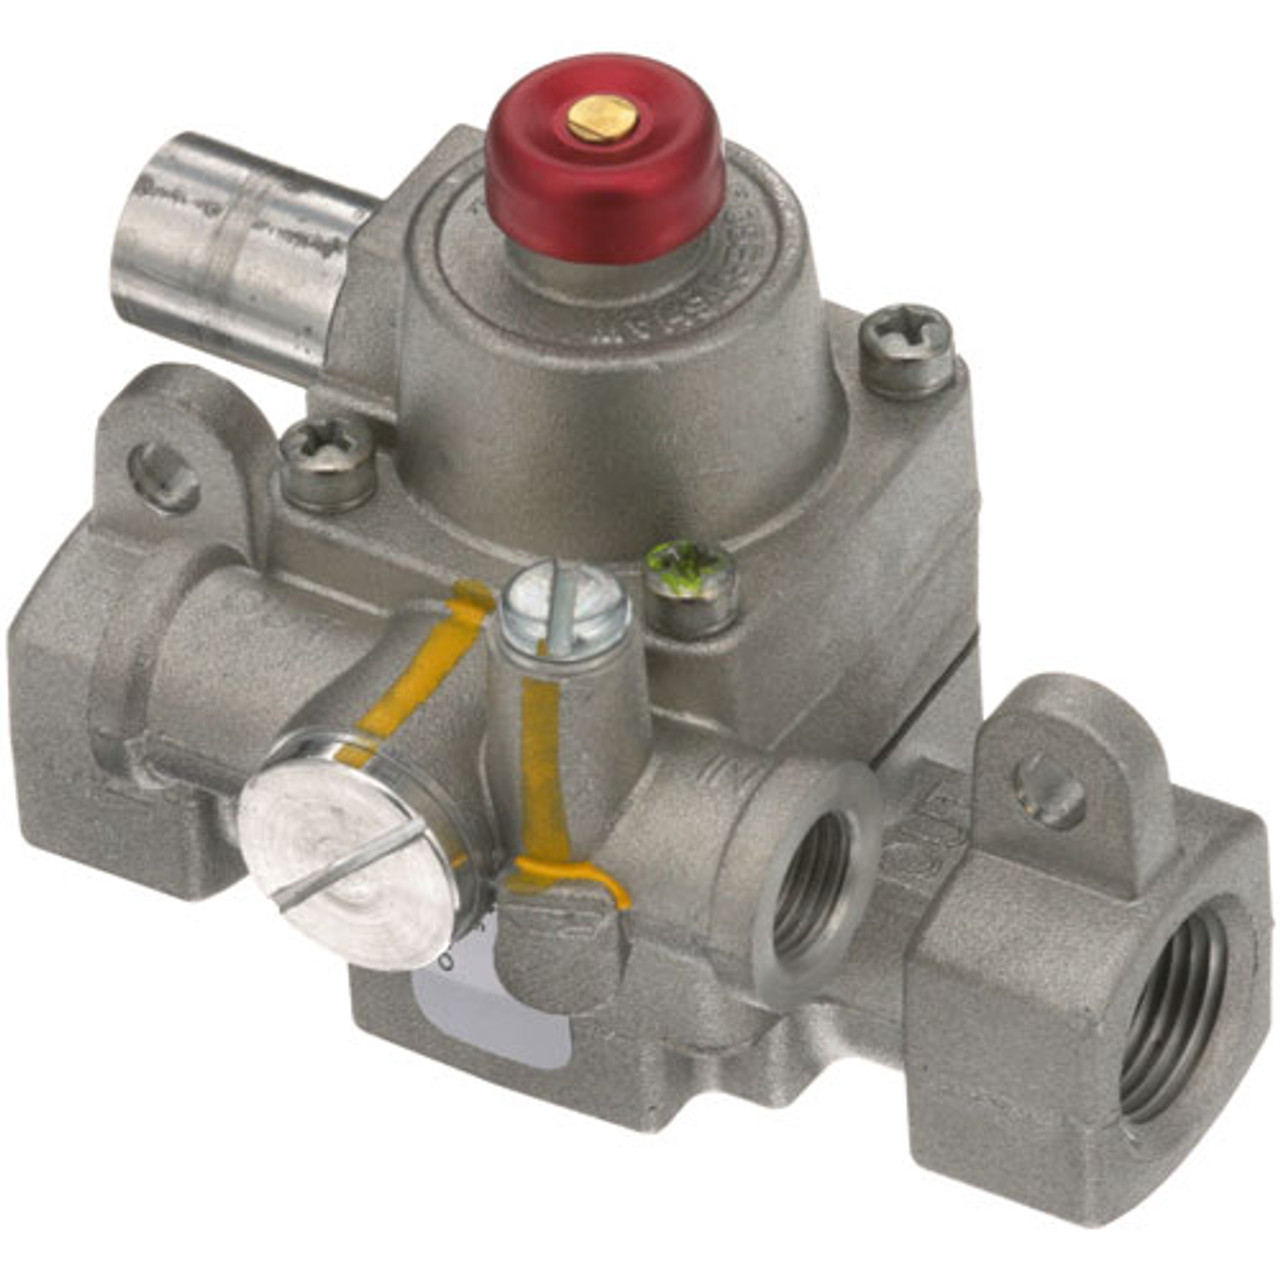 Safety Valve 3/8" - Replacement Part For Montague B-41A